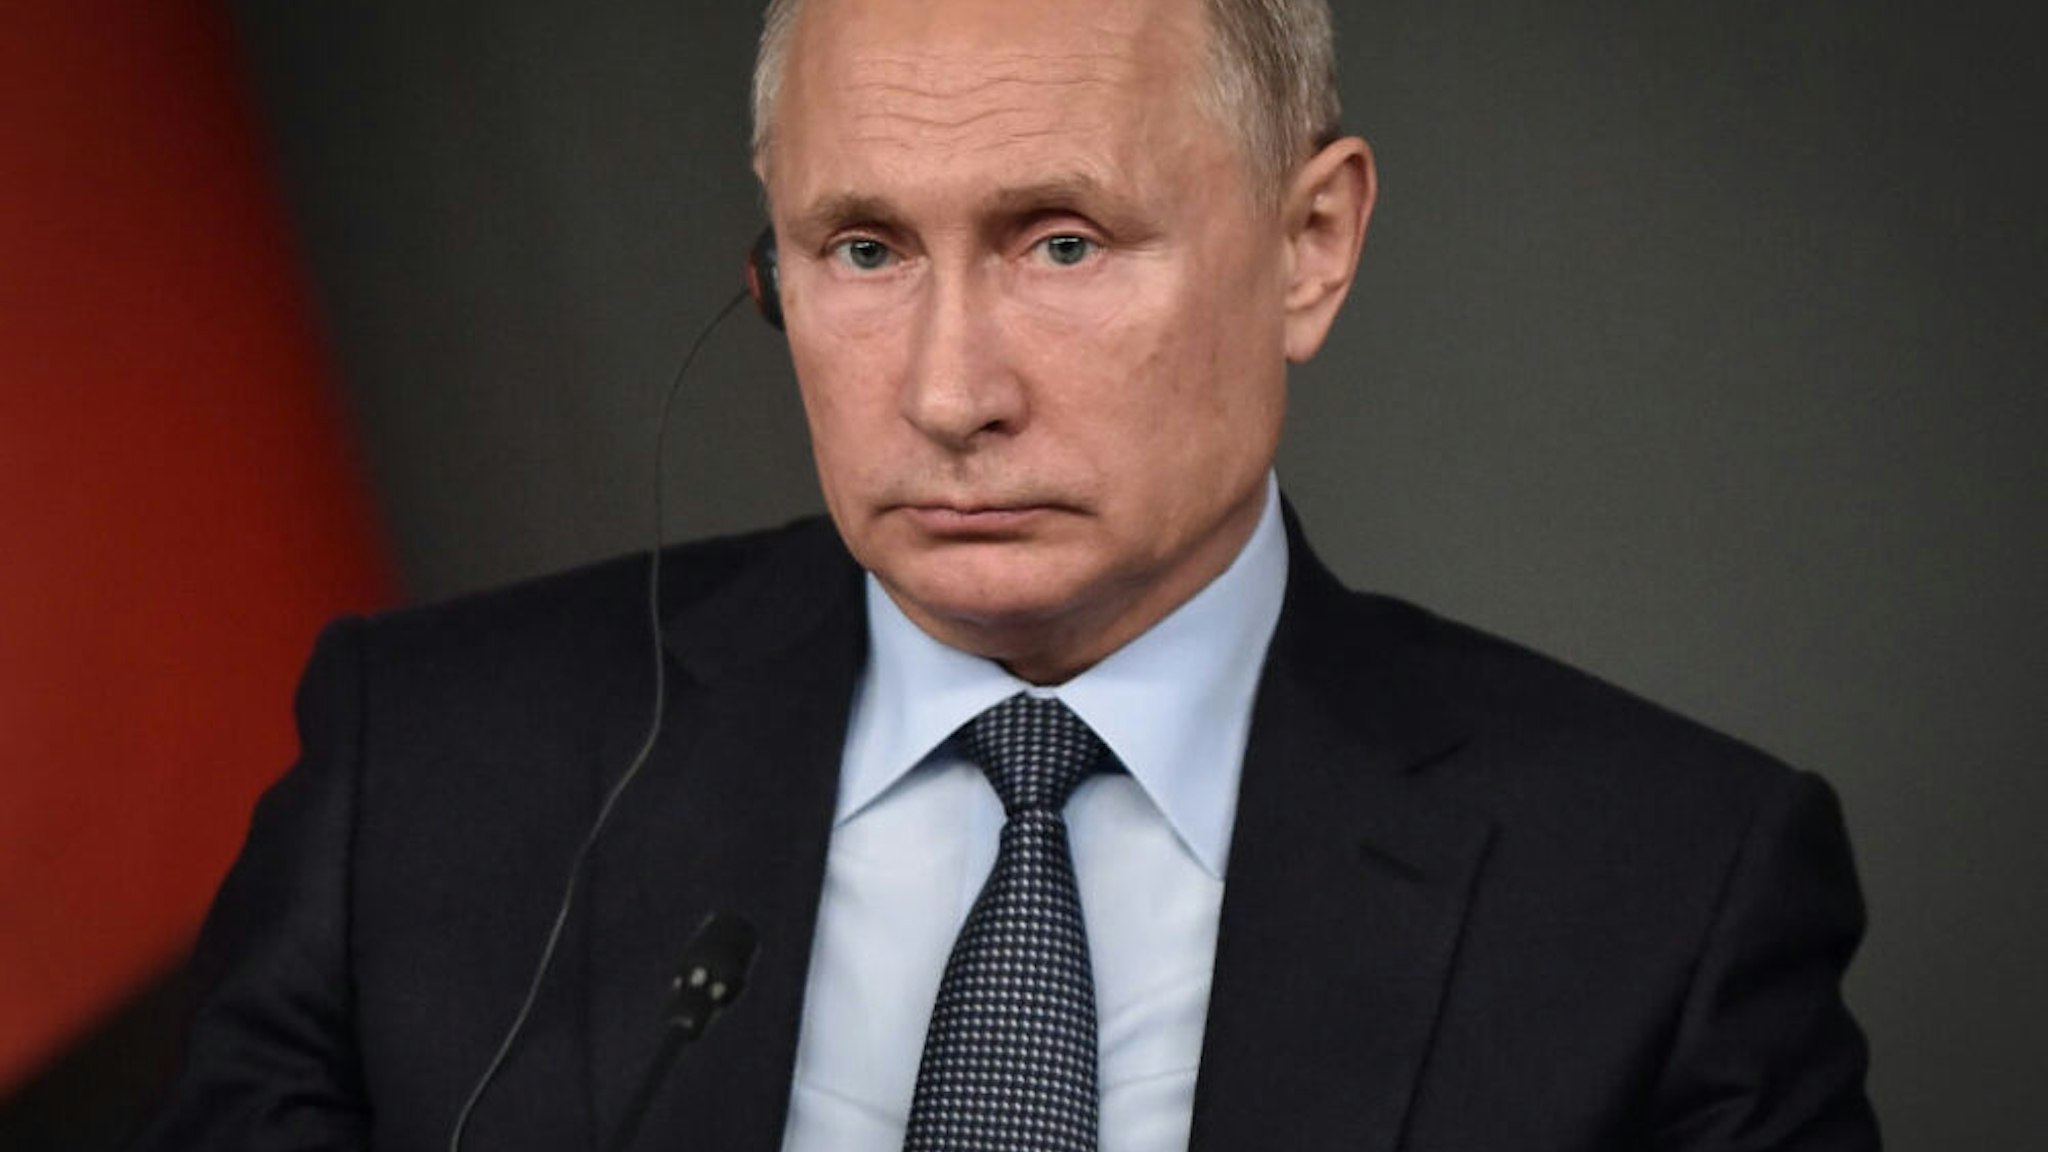 Russian President Vladimir Putin attends a conference as part of a summit called to attempt to find a lasting political solution to the civil war in Syria which has claimed in excess of 350 000 lives, at Vahdettin Mansion in Istanbul, on October 27, 2018. - The leaders of Turkey, Russia, France and Germany are set to meet in Istanbul to try to find a lasting political solution to the Syrian civil war and salvage a fragile ceasefire in a rebel-held northern province.